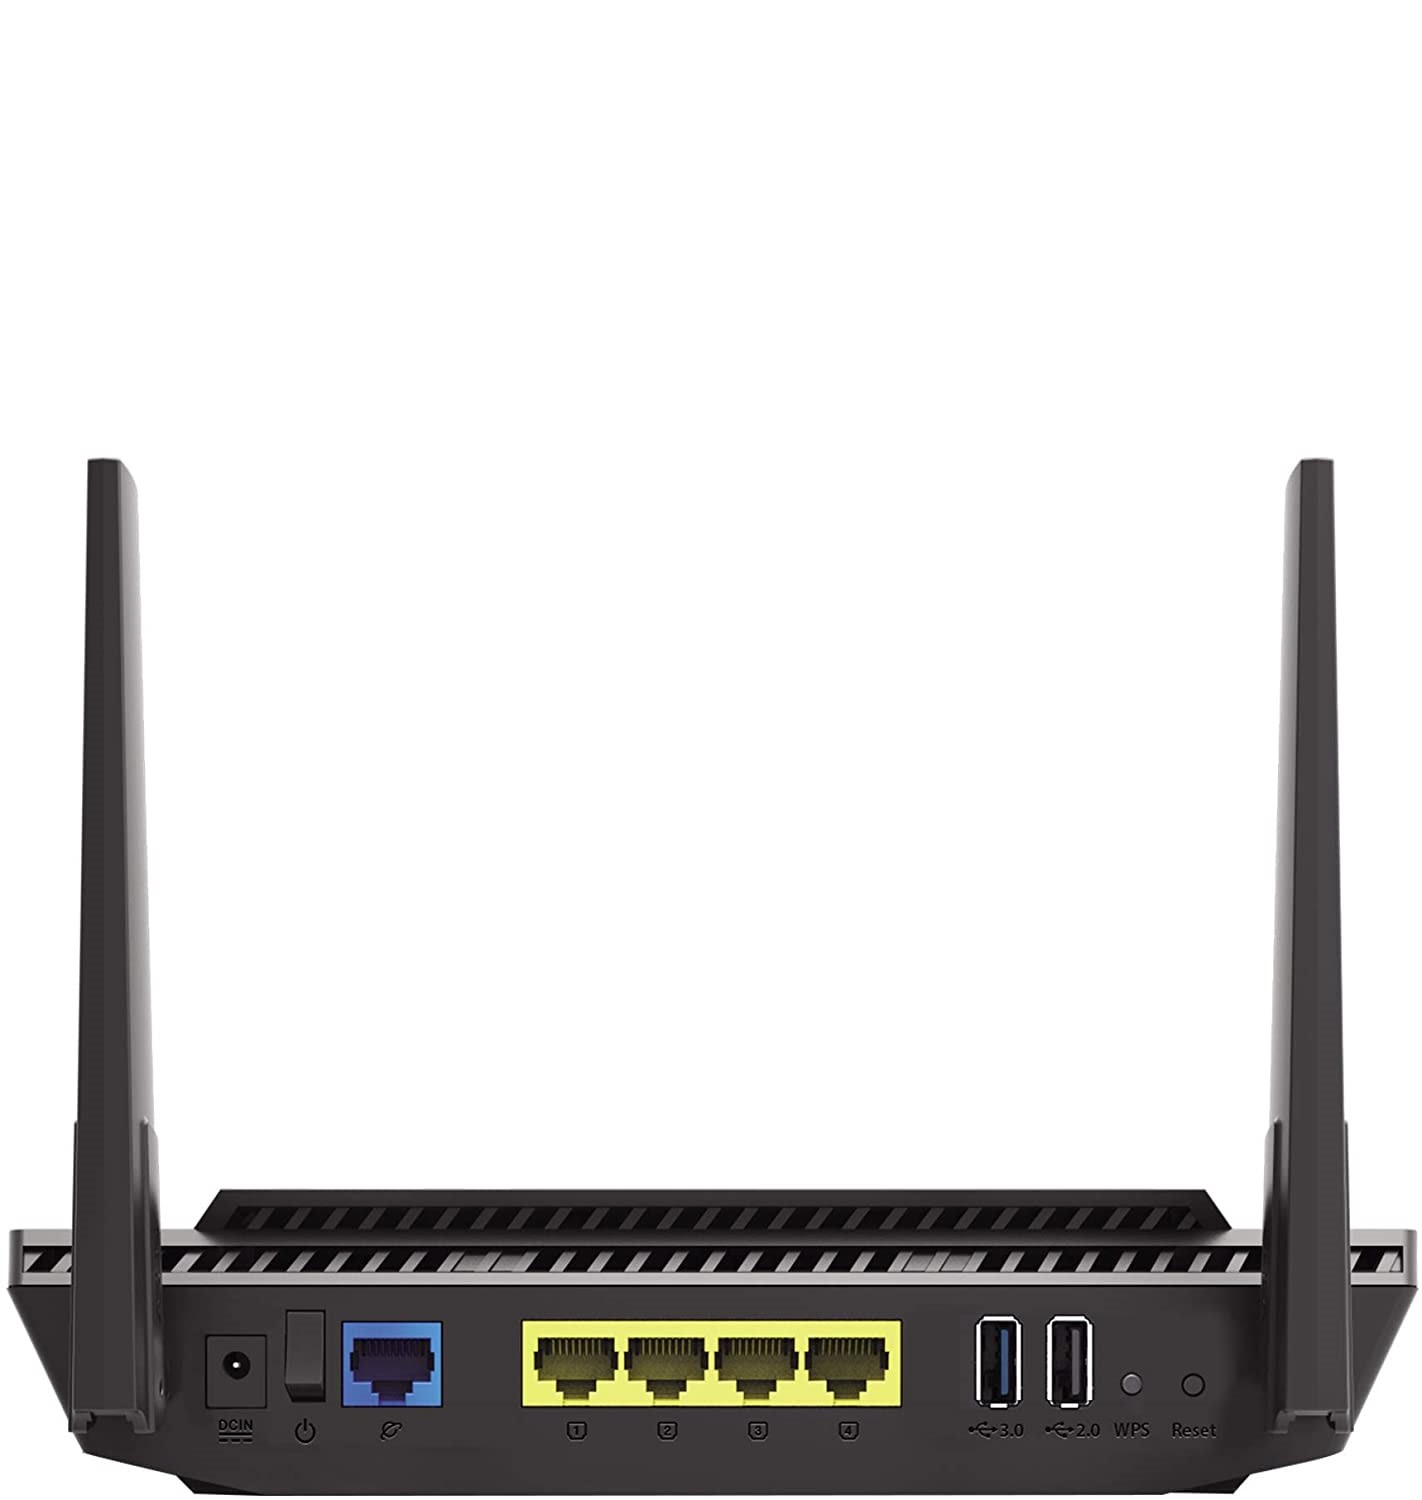 ASUS RT-AX56U - Wireless router - 4-port switch - 1GbE - Wi-Fi 6 - Dual Band - image 3 of 3